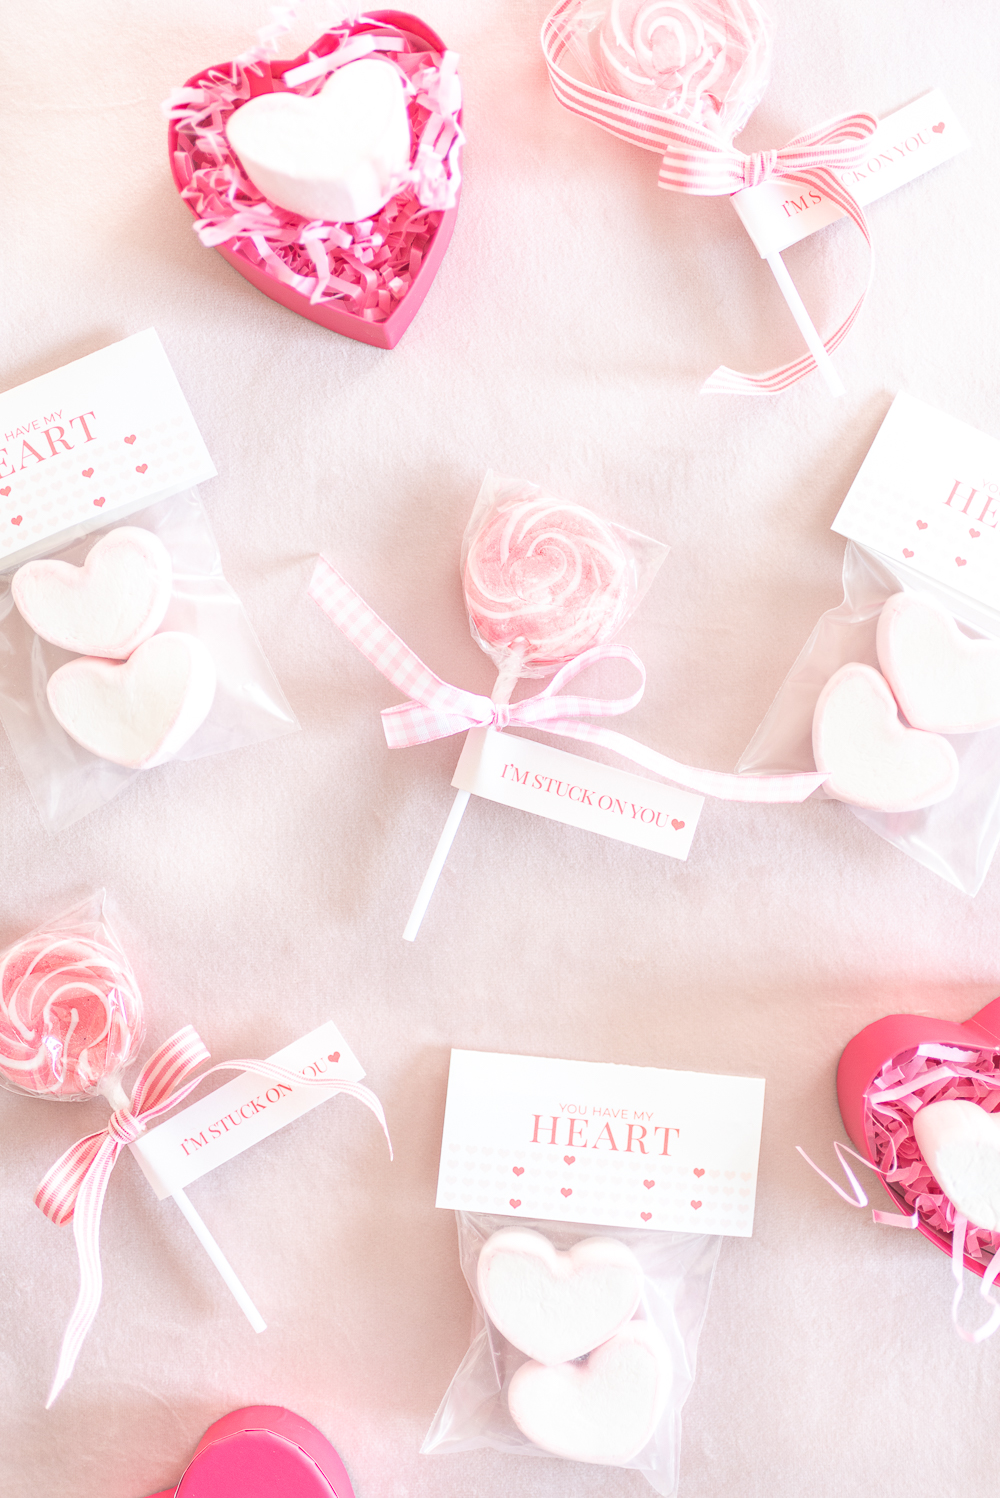 Easy DIY Valentine's Day Candy Basket + Free Printable! ⋆ Brite and Bubbly